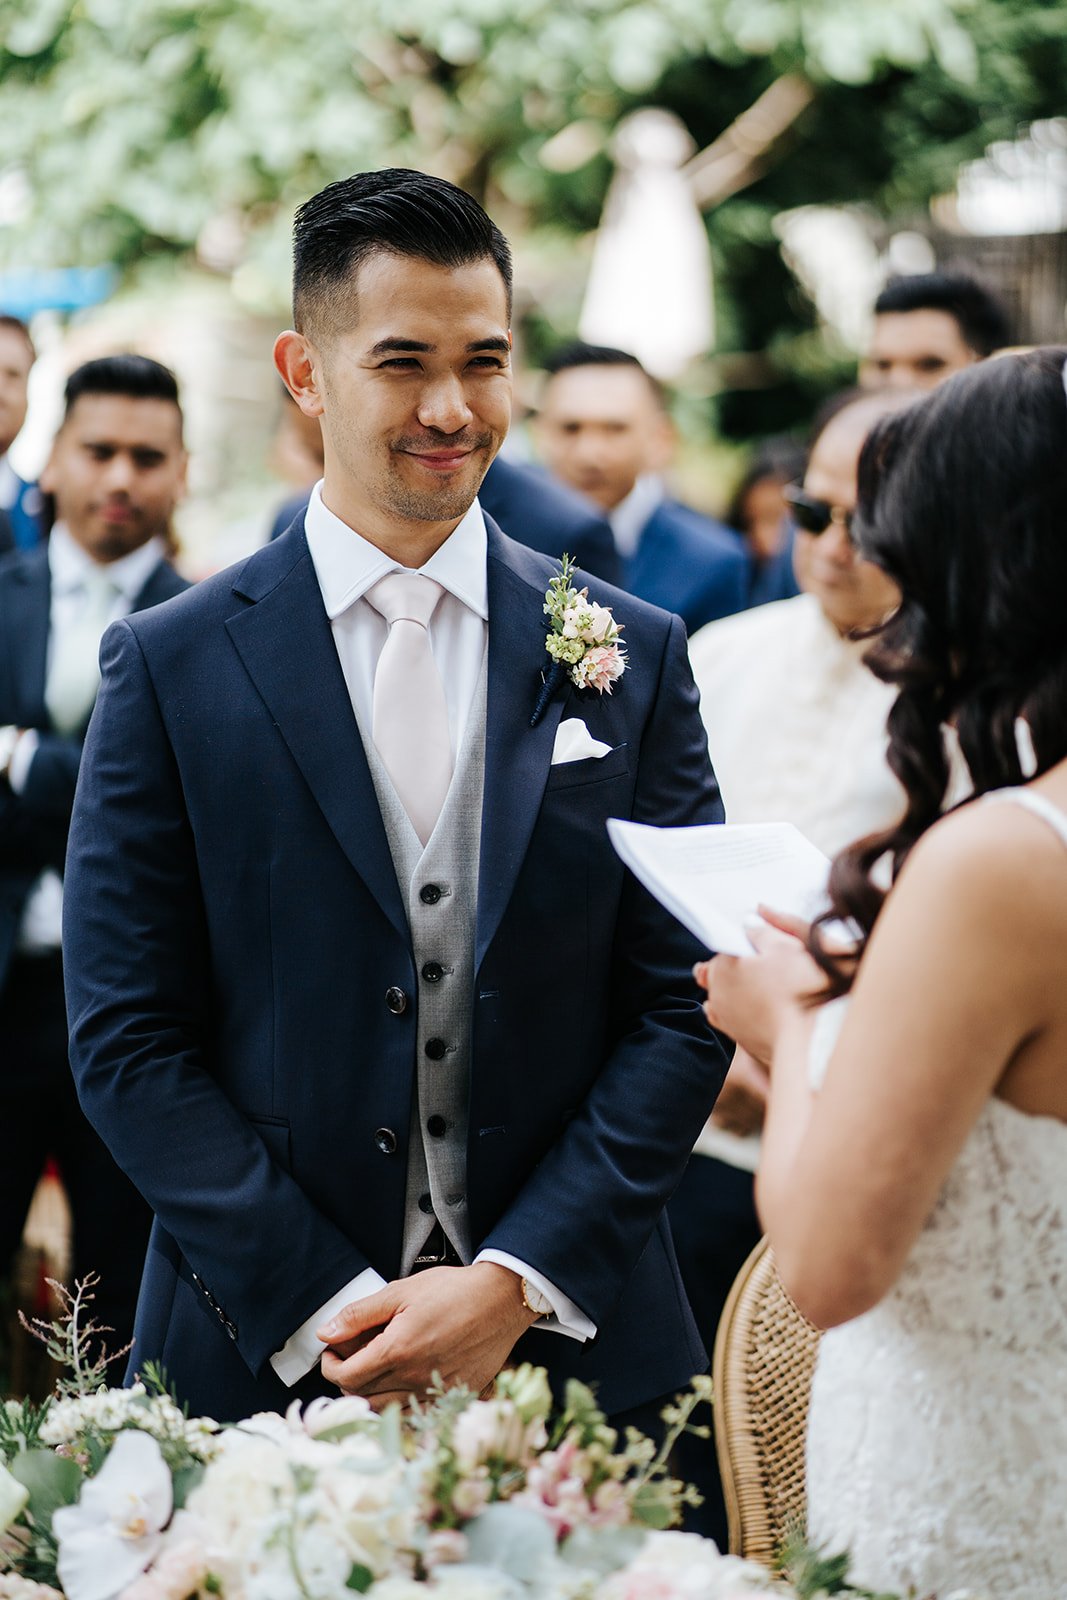 Groom stands and smiles in close-up photograph as bride reads her wedding vows to him